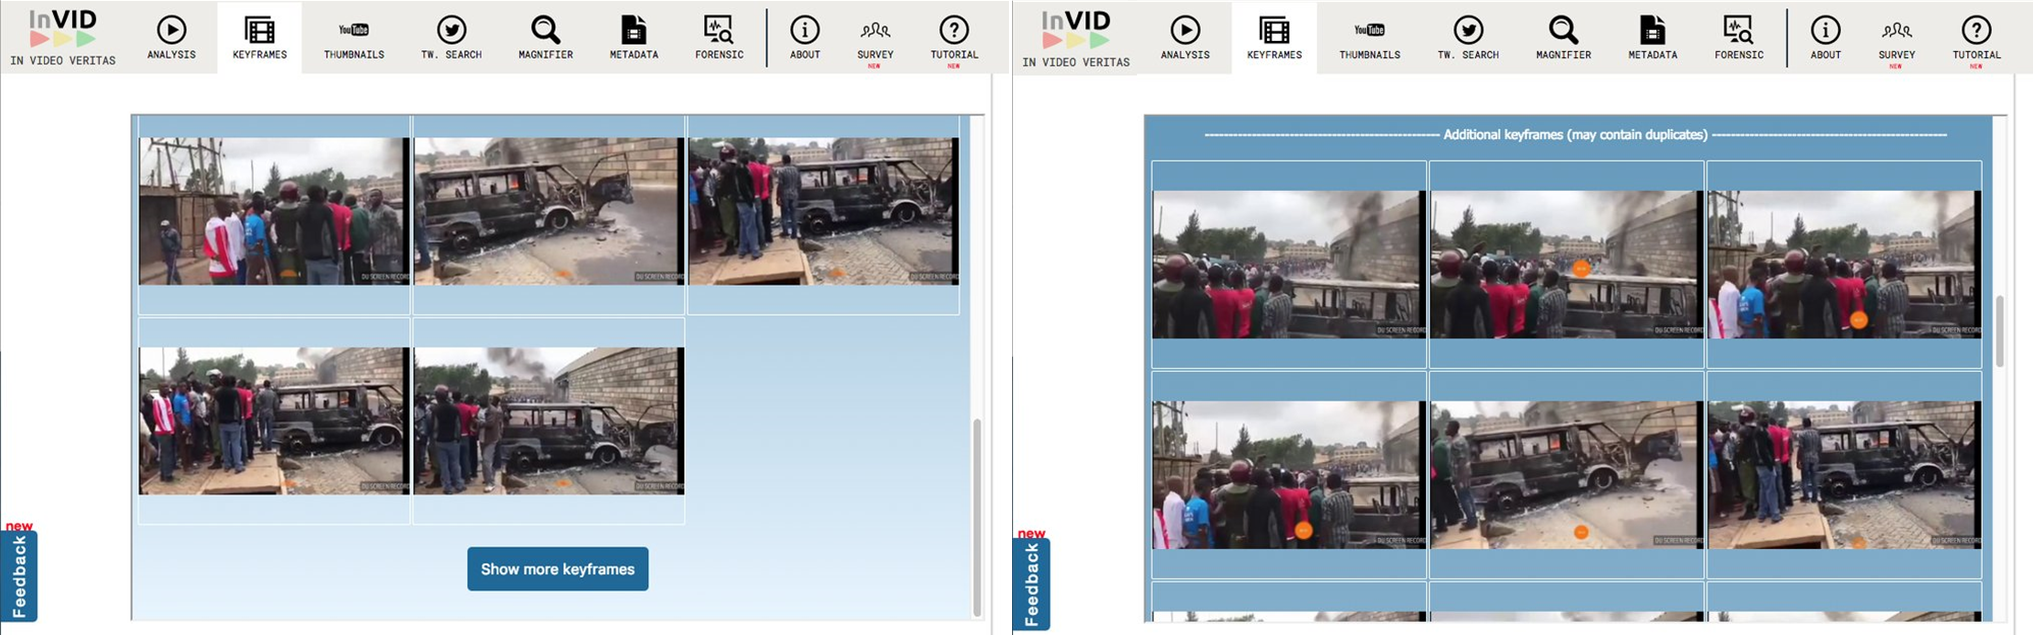 The video keyframe extraction tool offers additional keyframes for reverse image search (right image) after a user request via a simple button at the end of the initial collection of keyframes (left image)